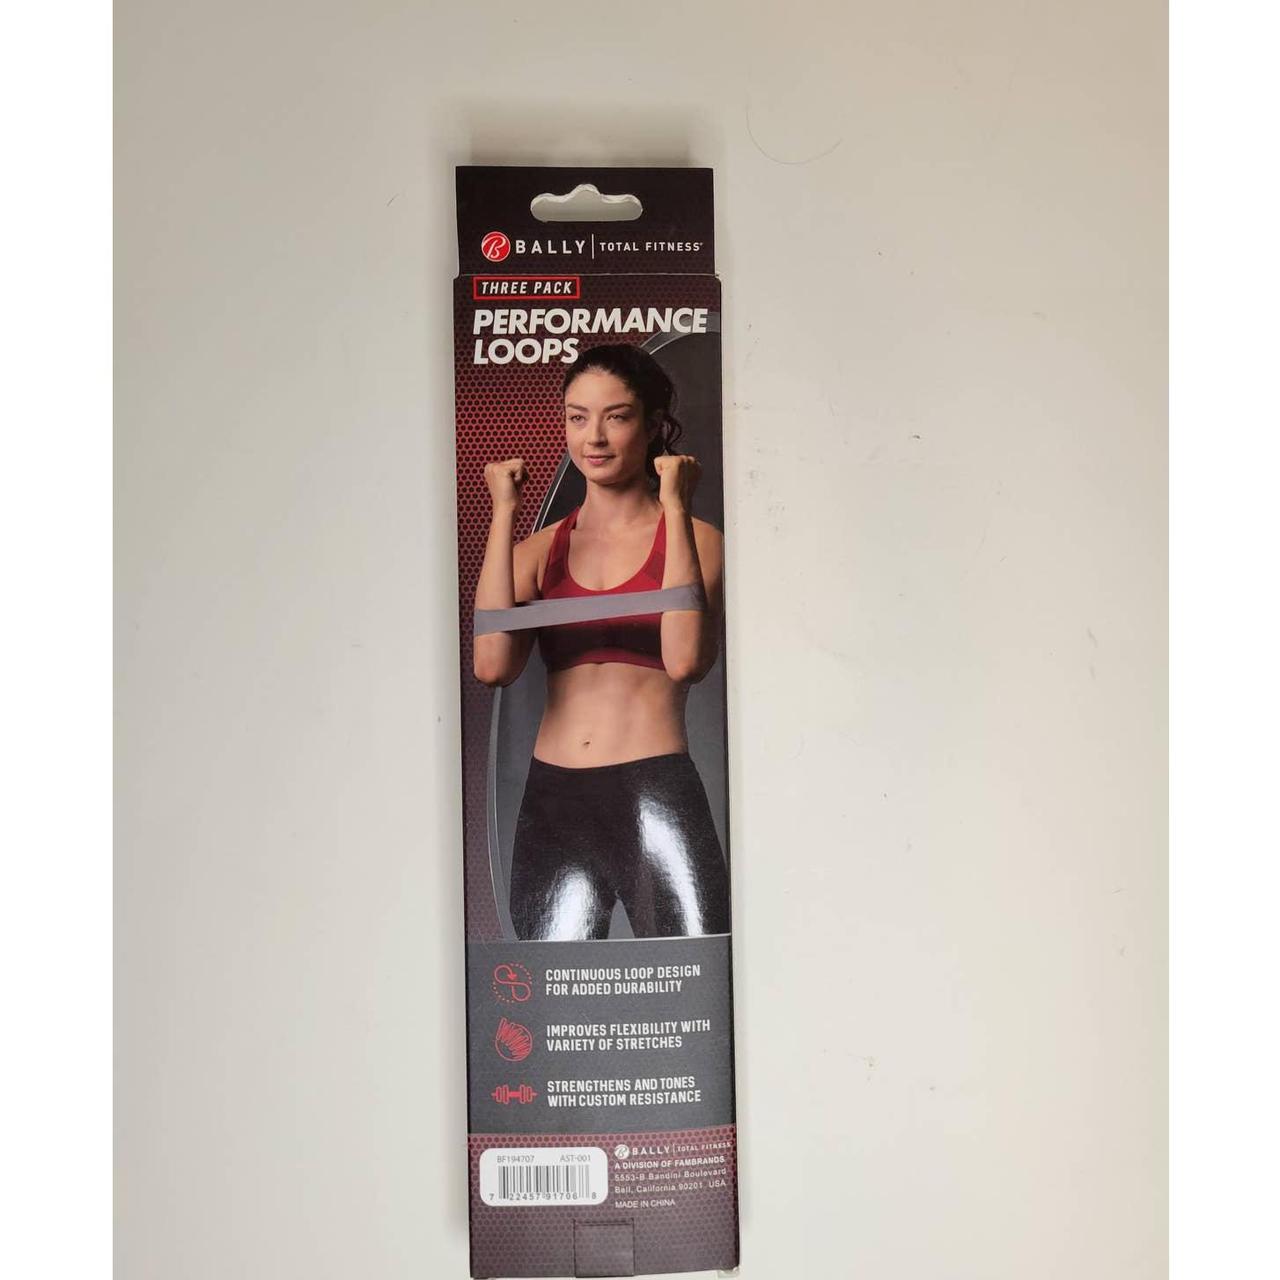 Bally BALLY TOTAL FITNESS~3 Pack Performance Loops Resistance Bands New In Box 